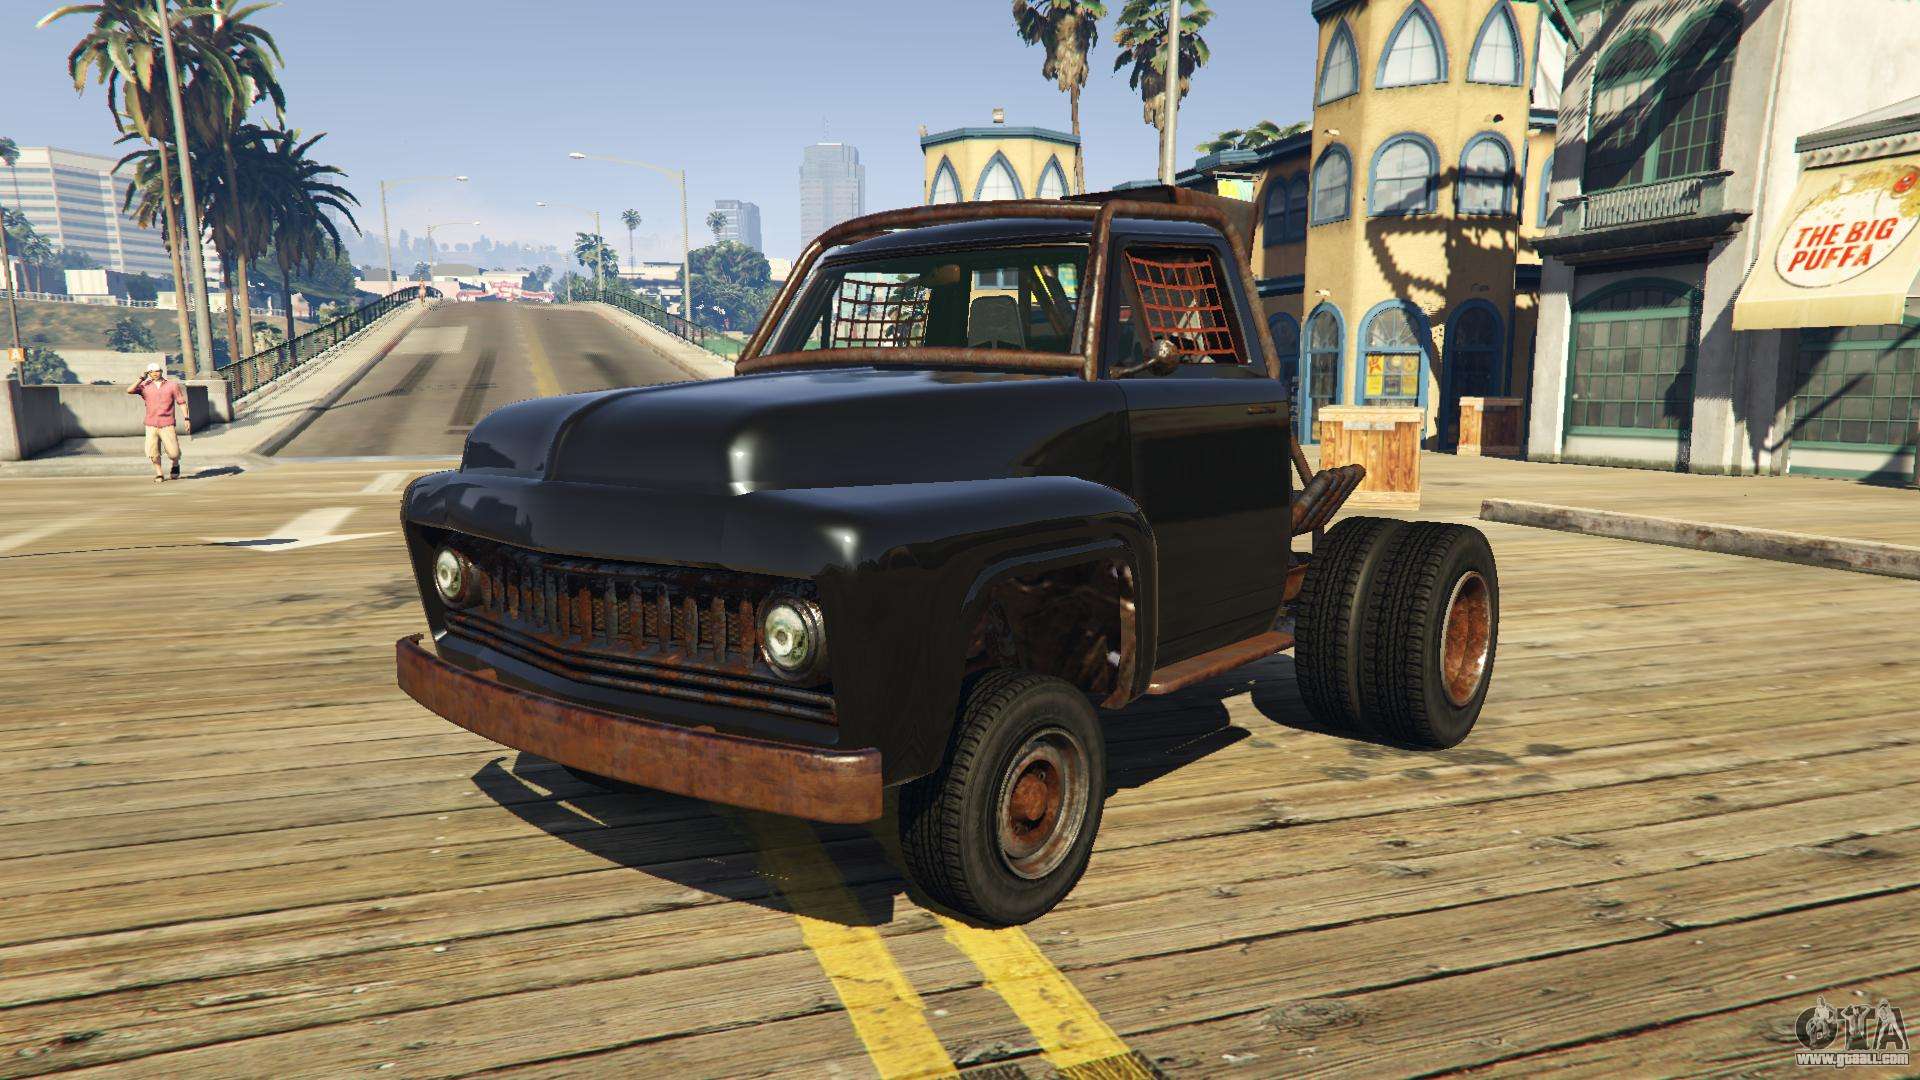 Vapid Apocalypse Slamvan Gta 5 Online Where To Find And To Buy And Sell In Real Life Description